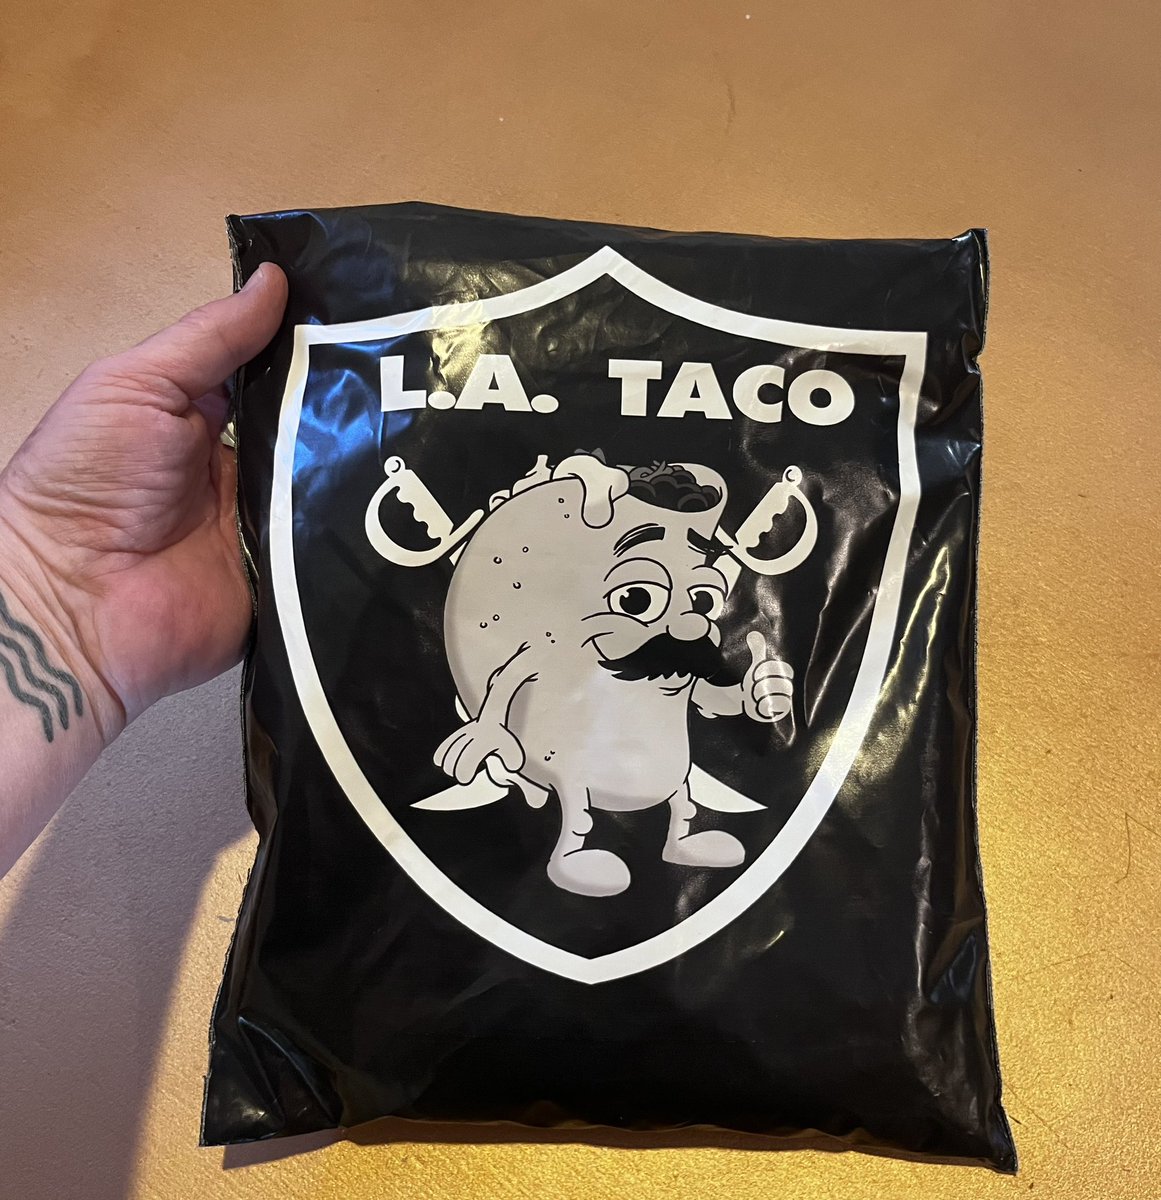 Subscribe, or buy cool swag. Support @LATACO